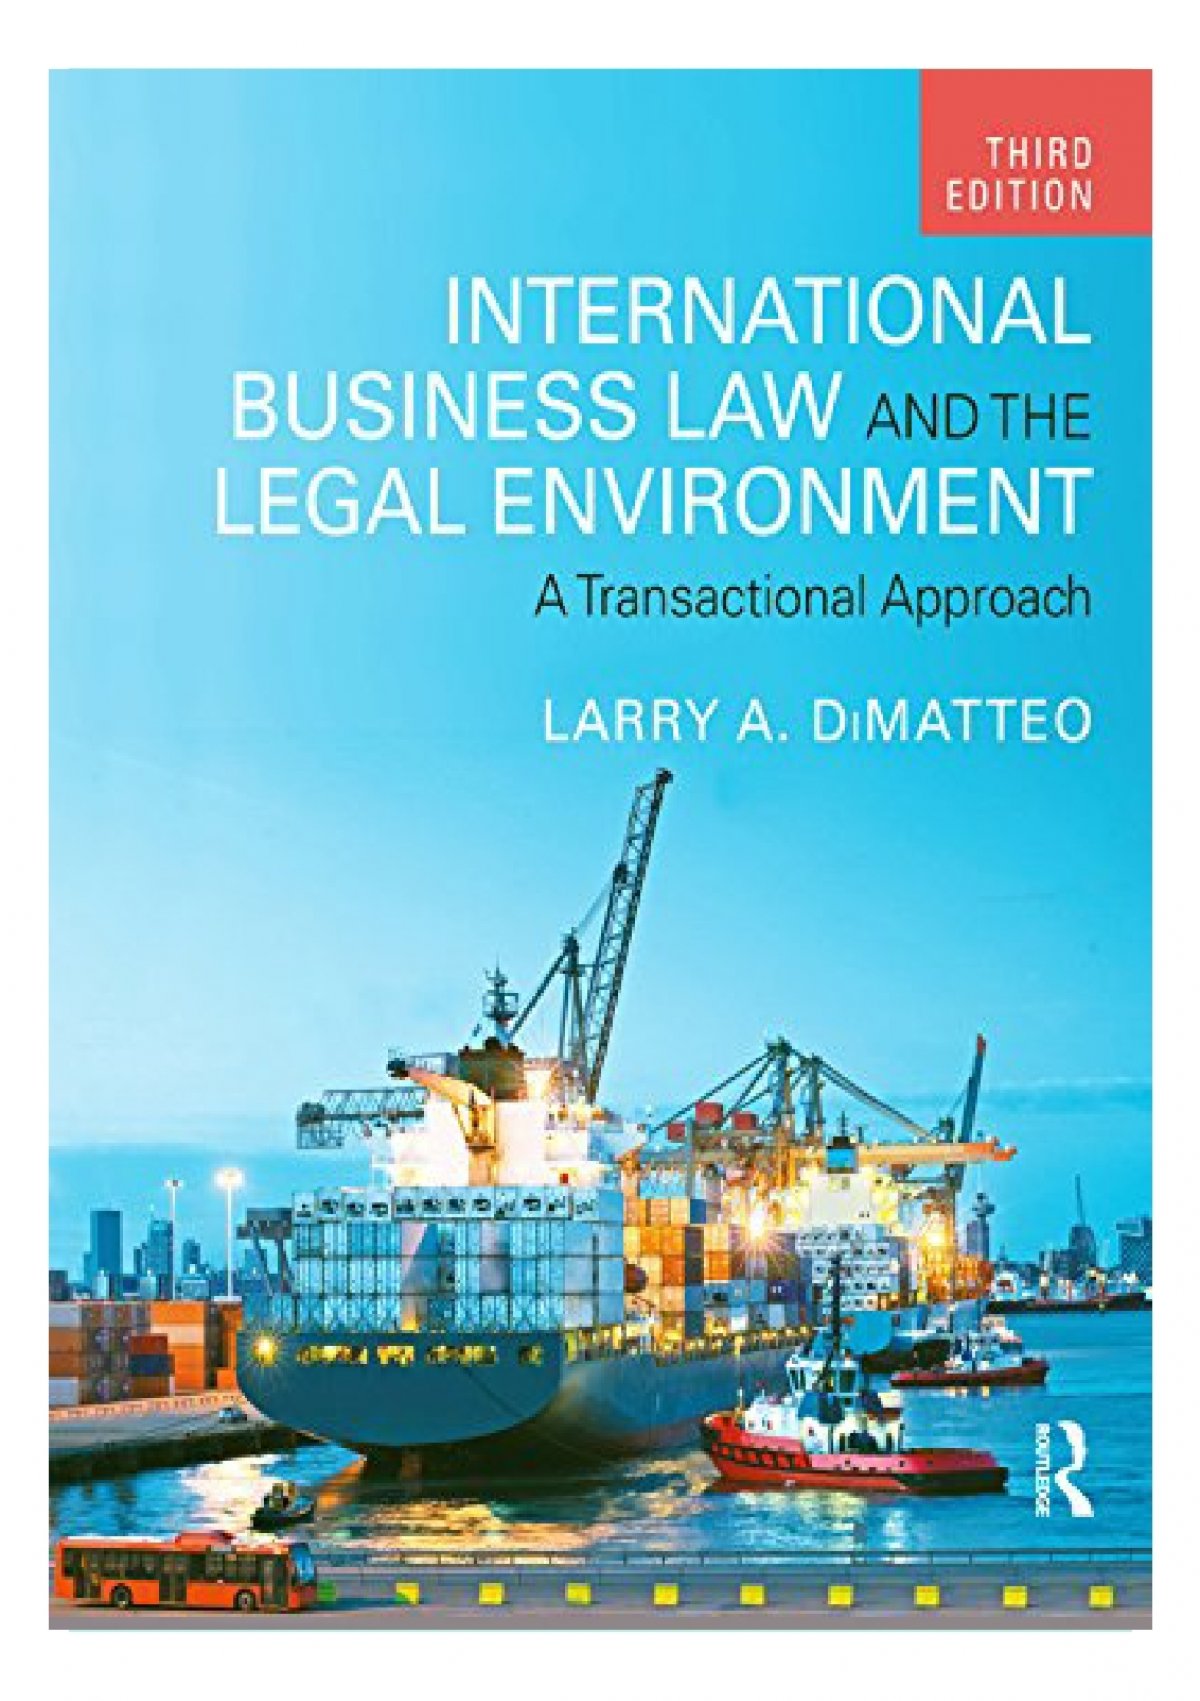 PDF-International-Business-Law-and-the-Legal-Environment--A